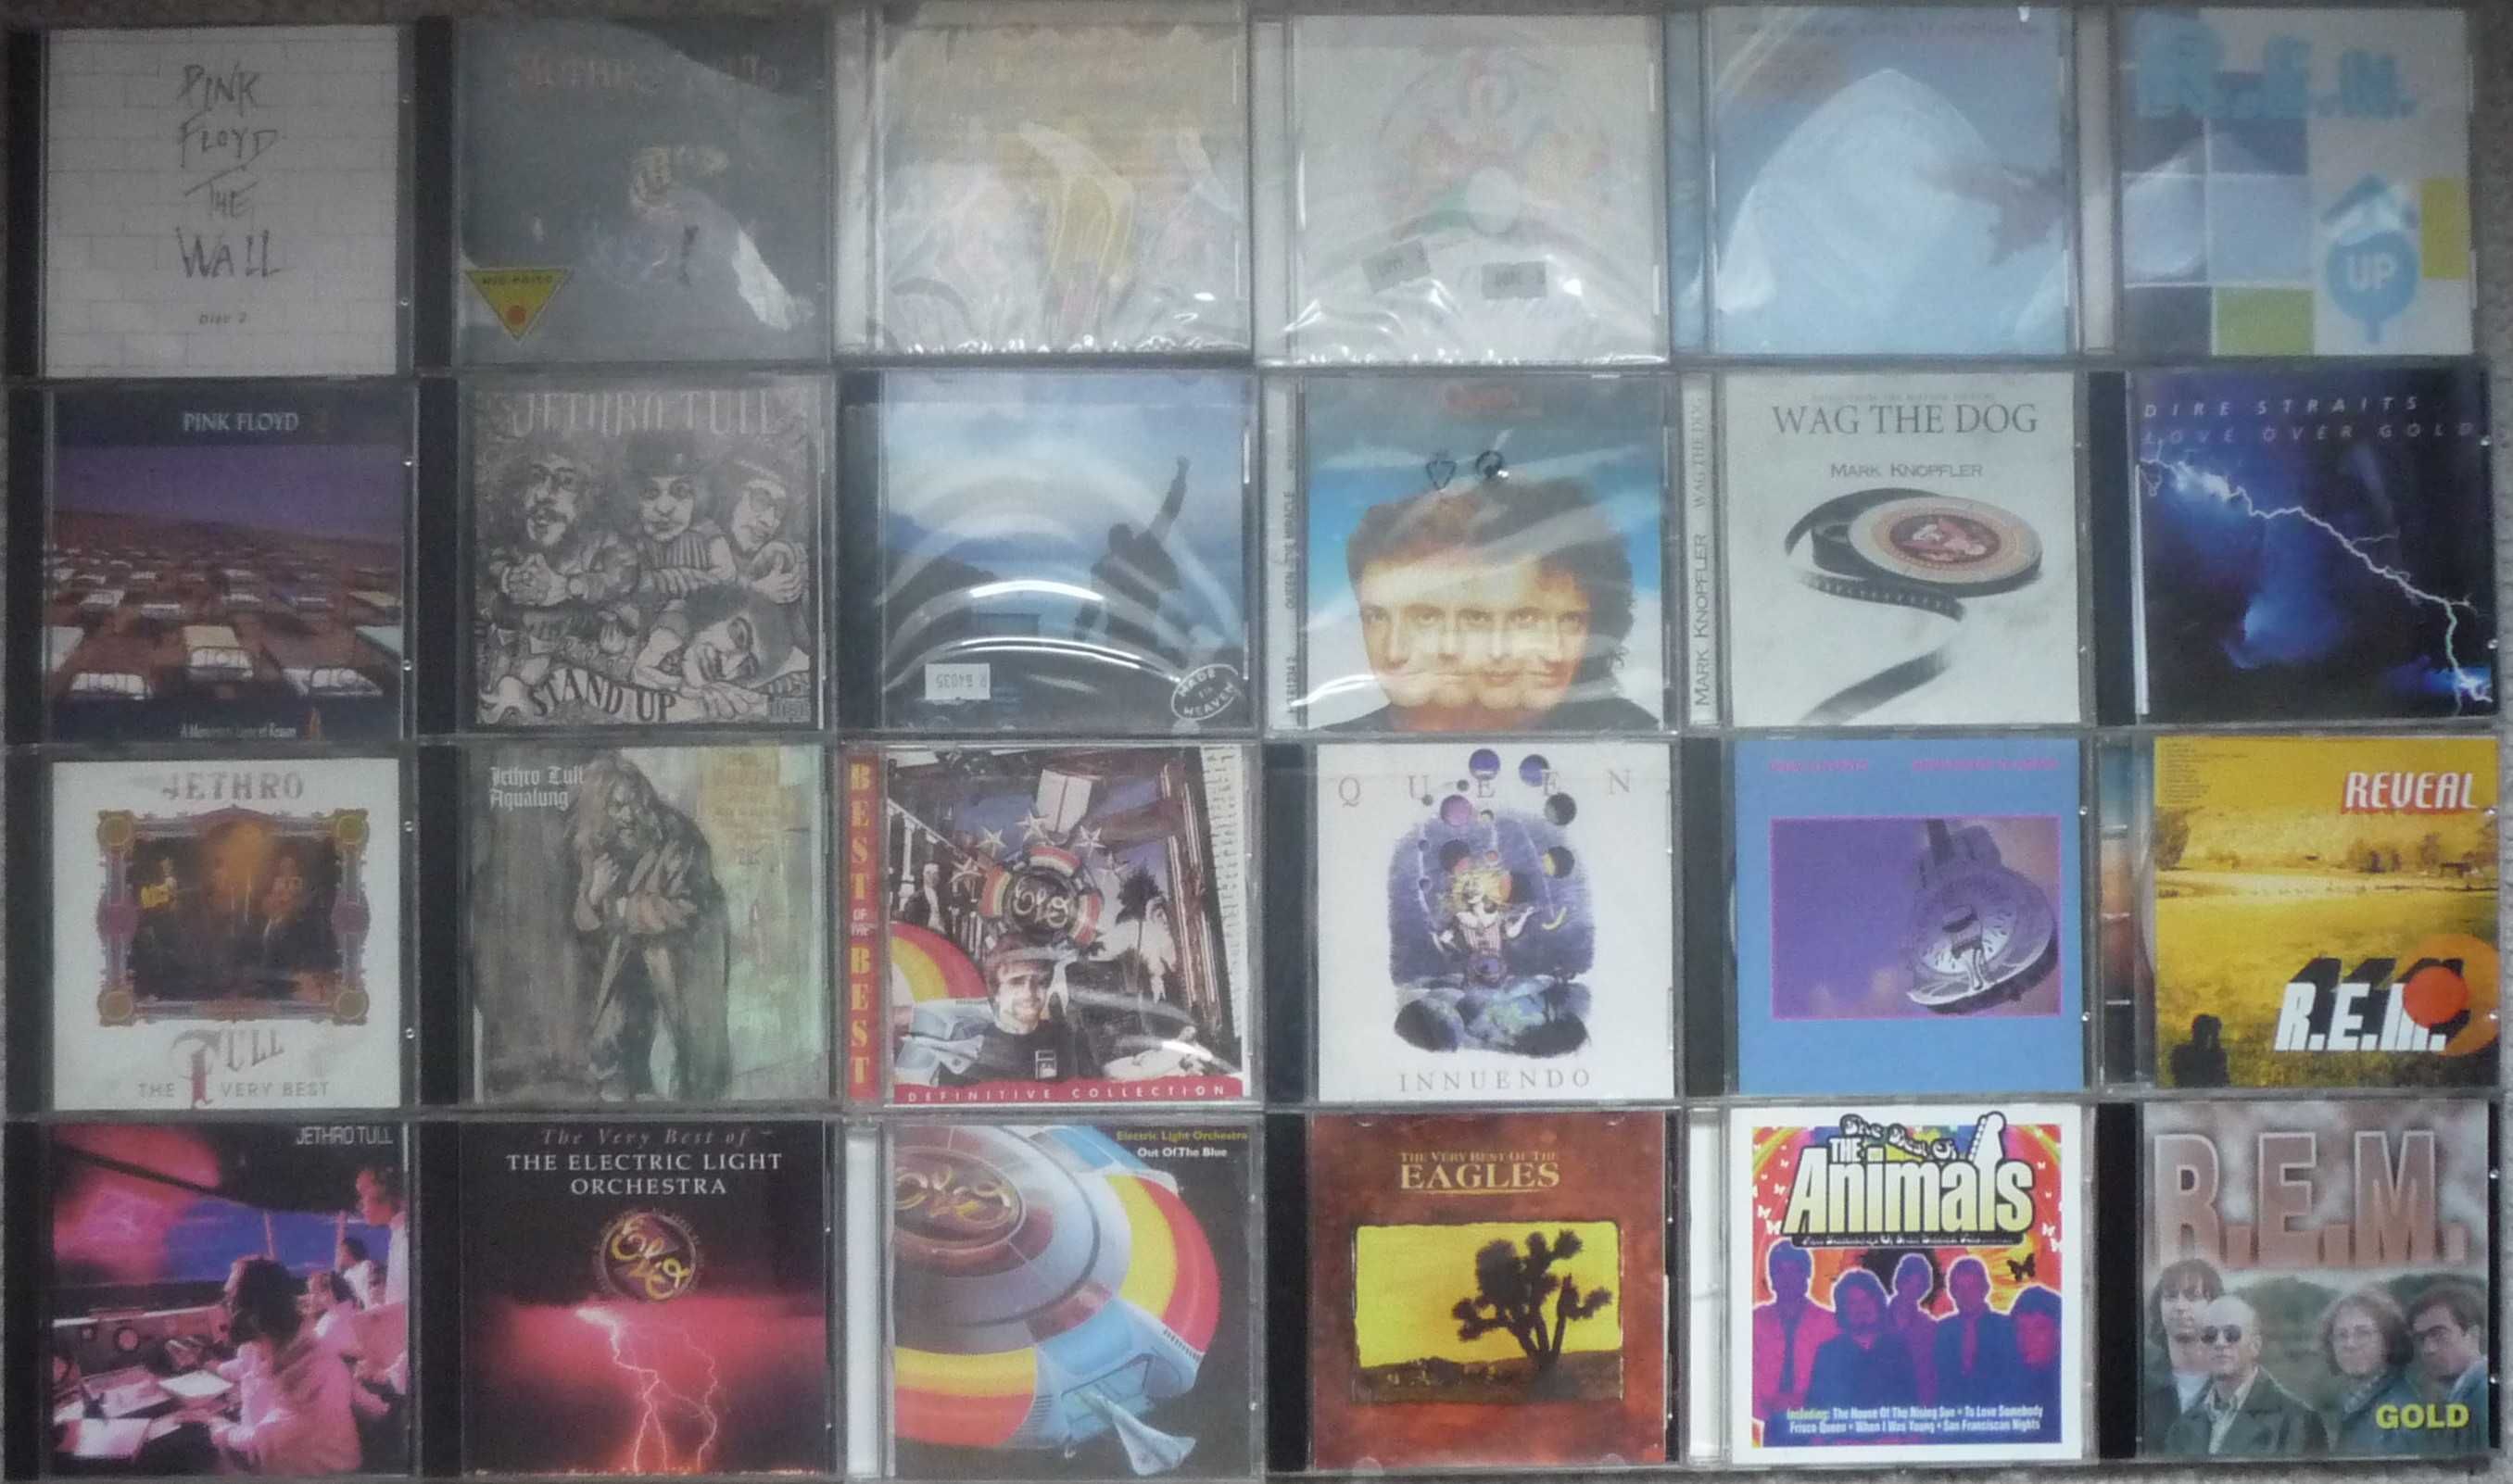 Pink Floyd, The Beatles, Jethro Tull, Enigma, Sting, Cars